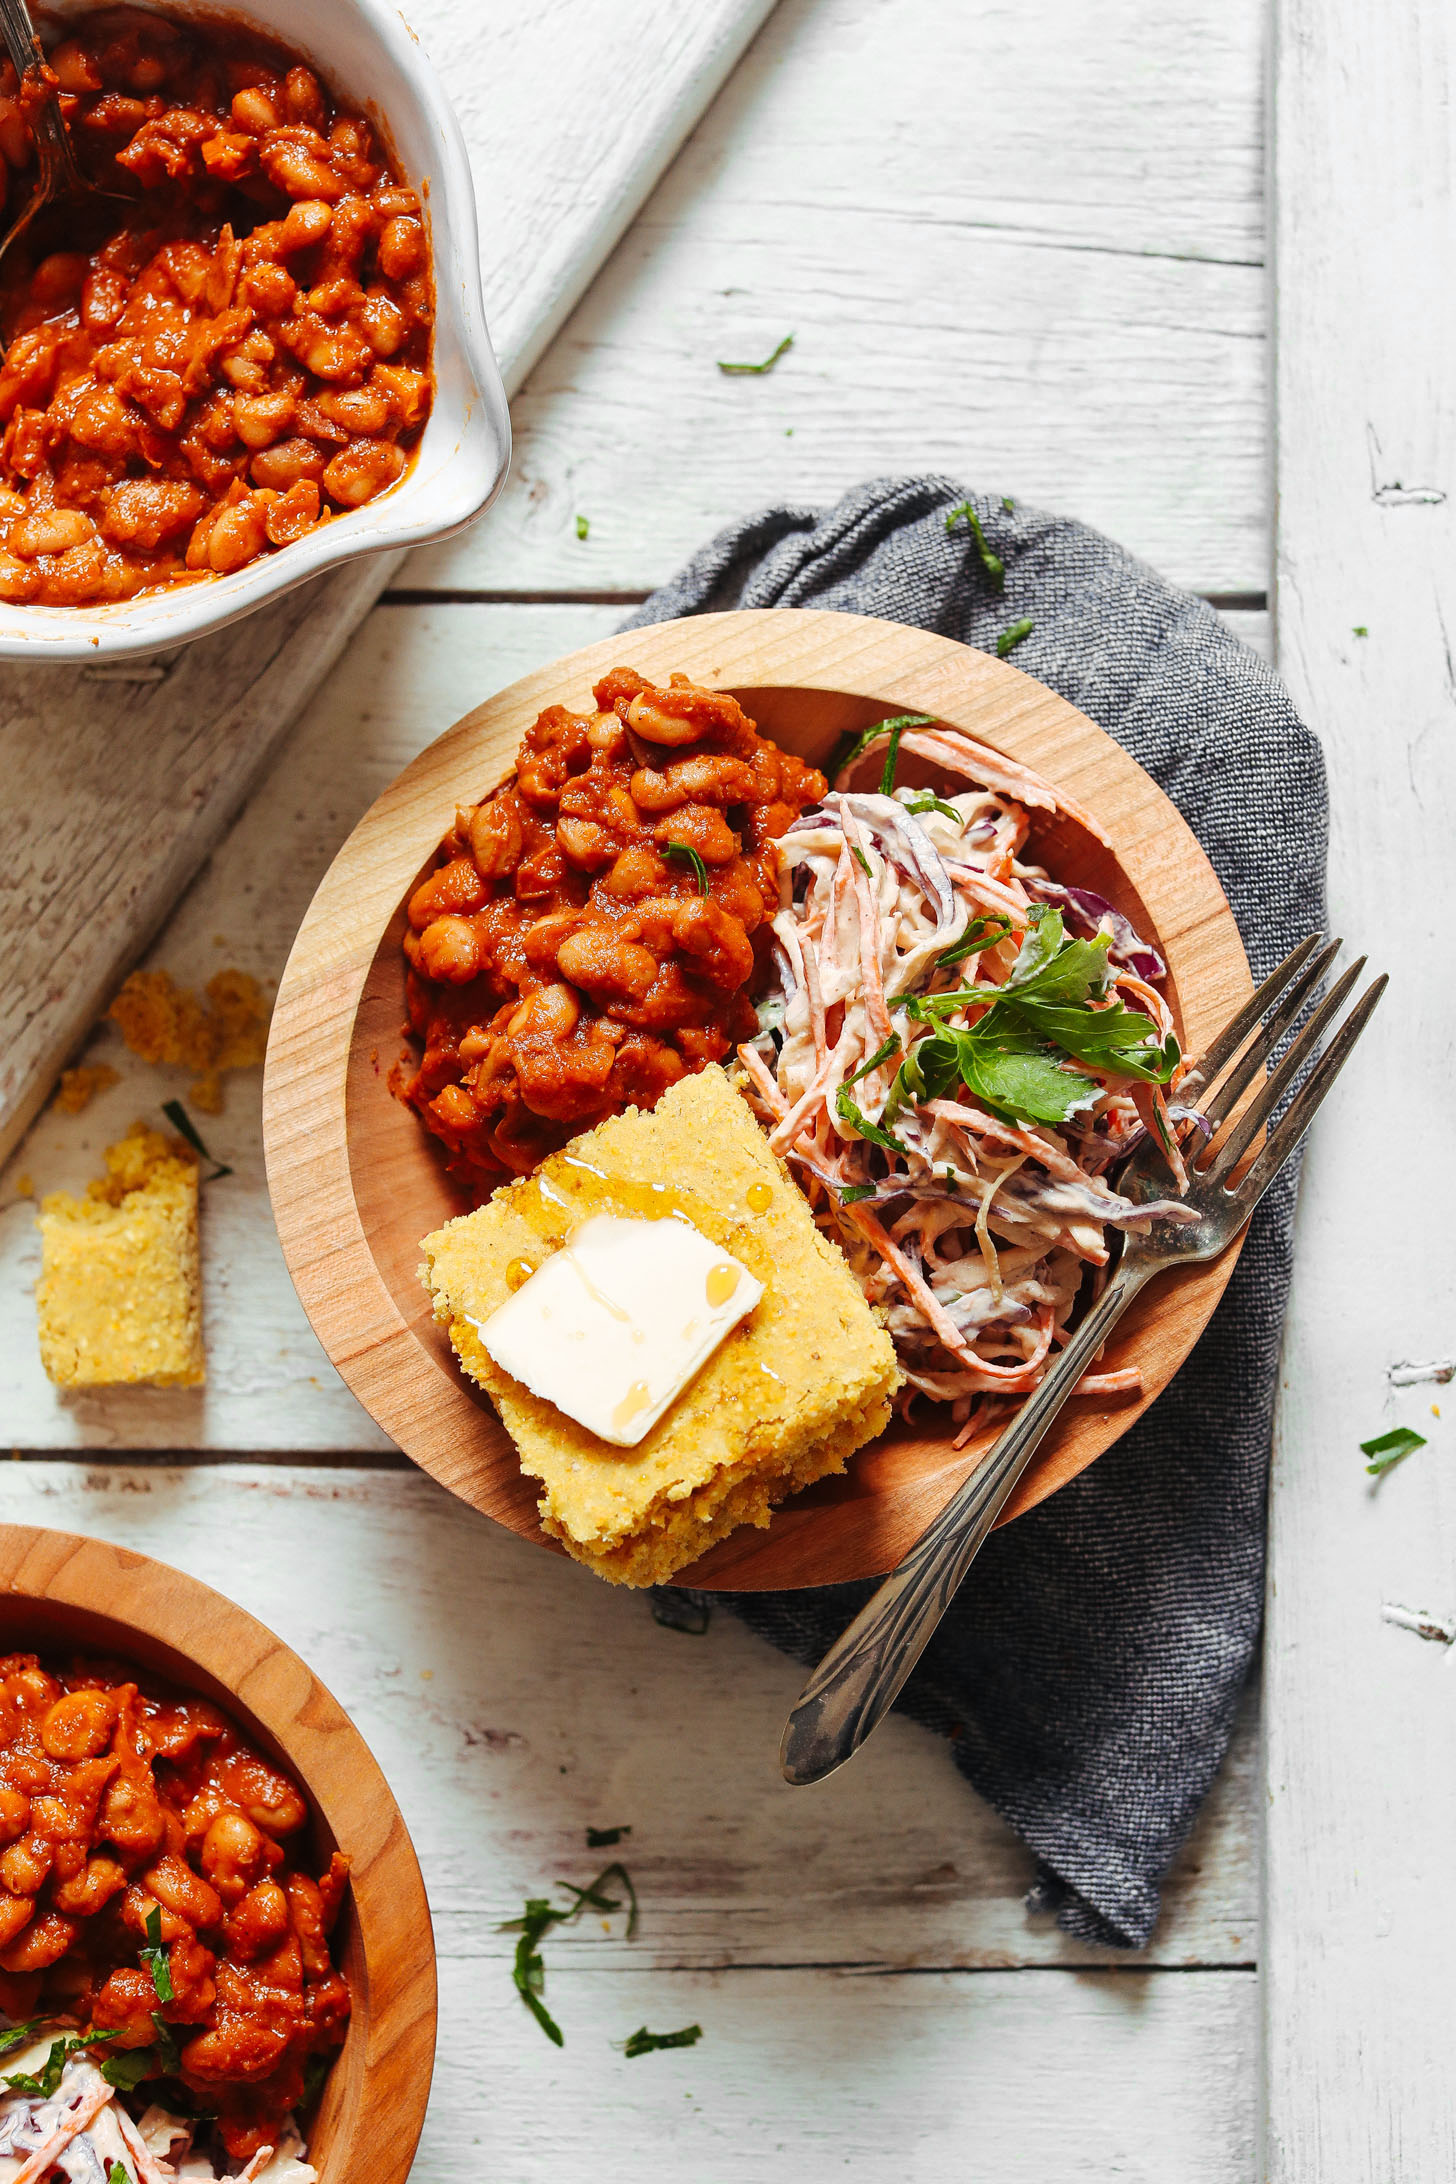 Close up shot of a bowl of Baked Beans, Vegan Coleslaw, and GF Cornbread with Vegan Butter